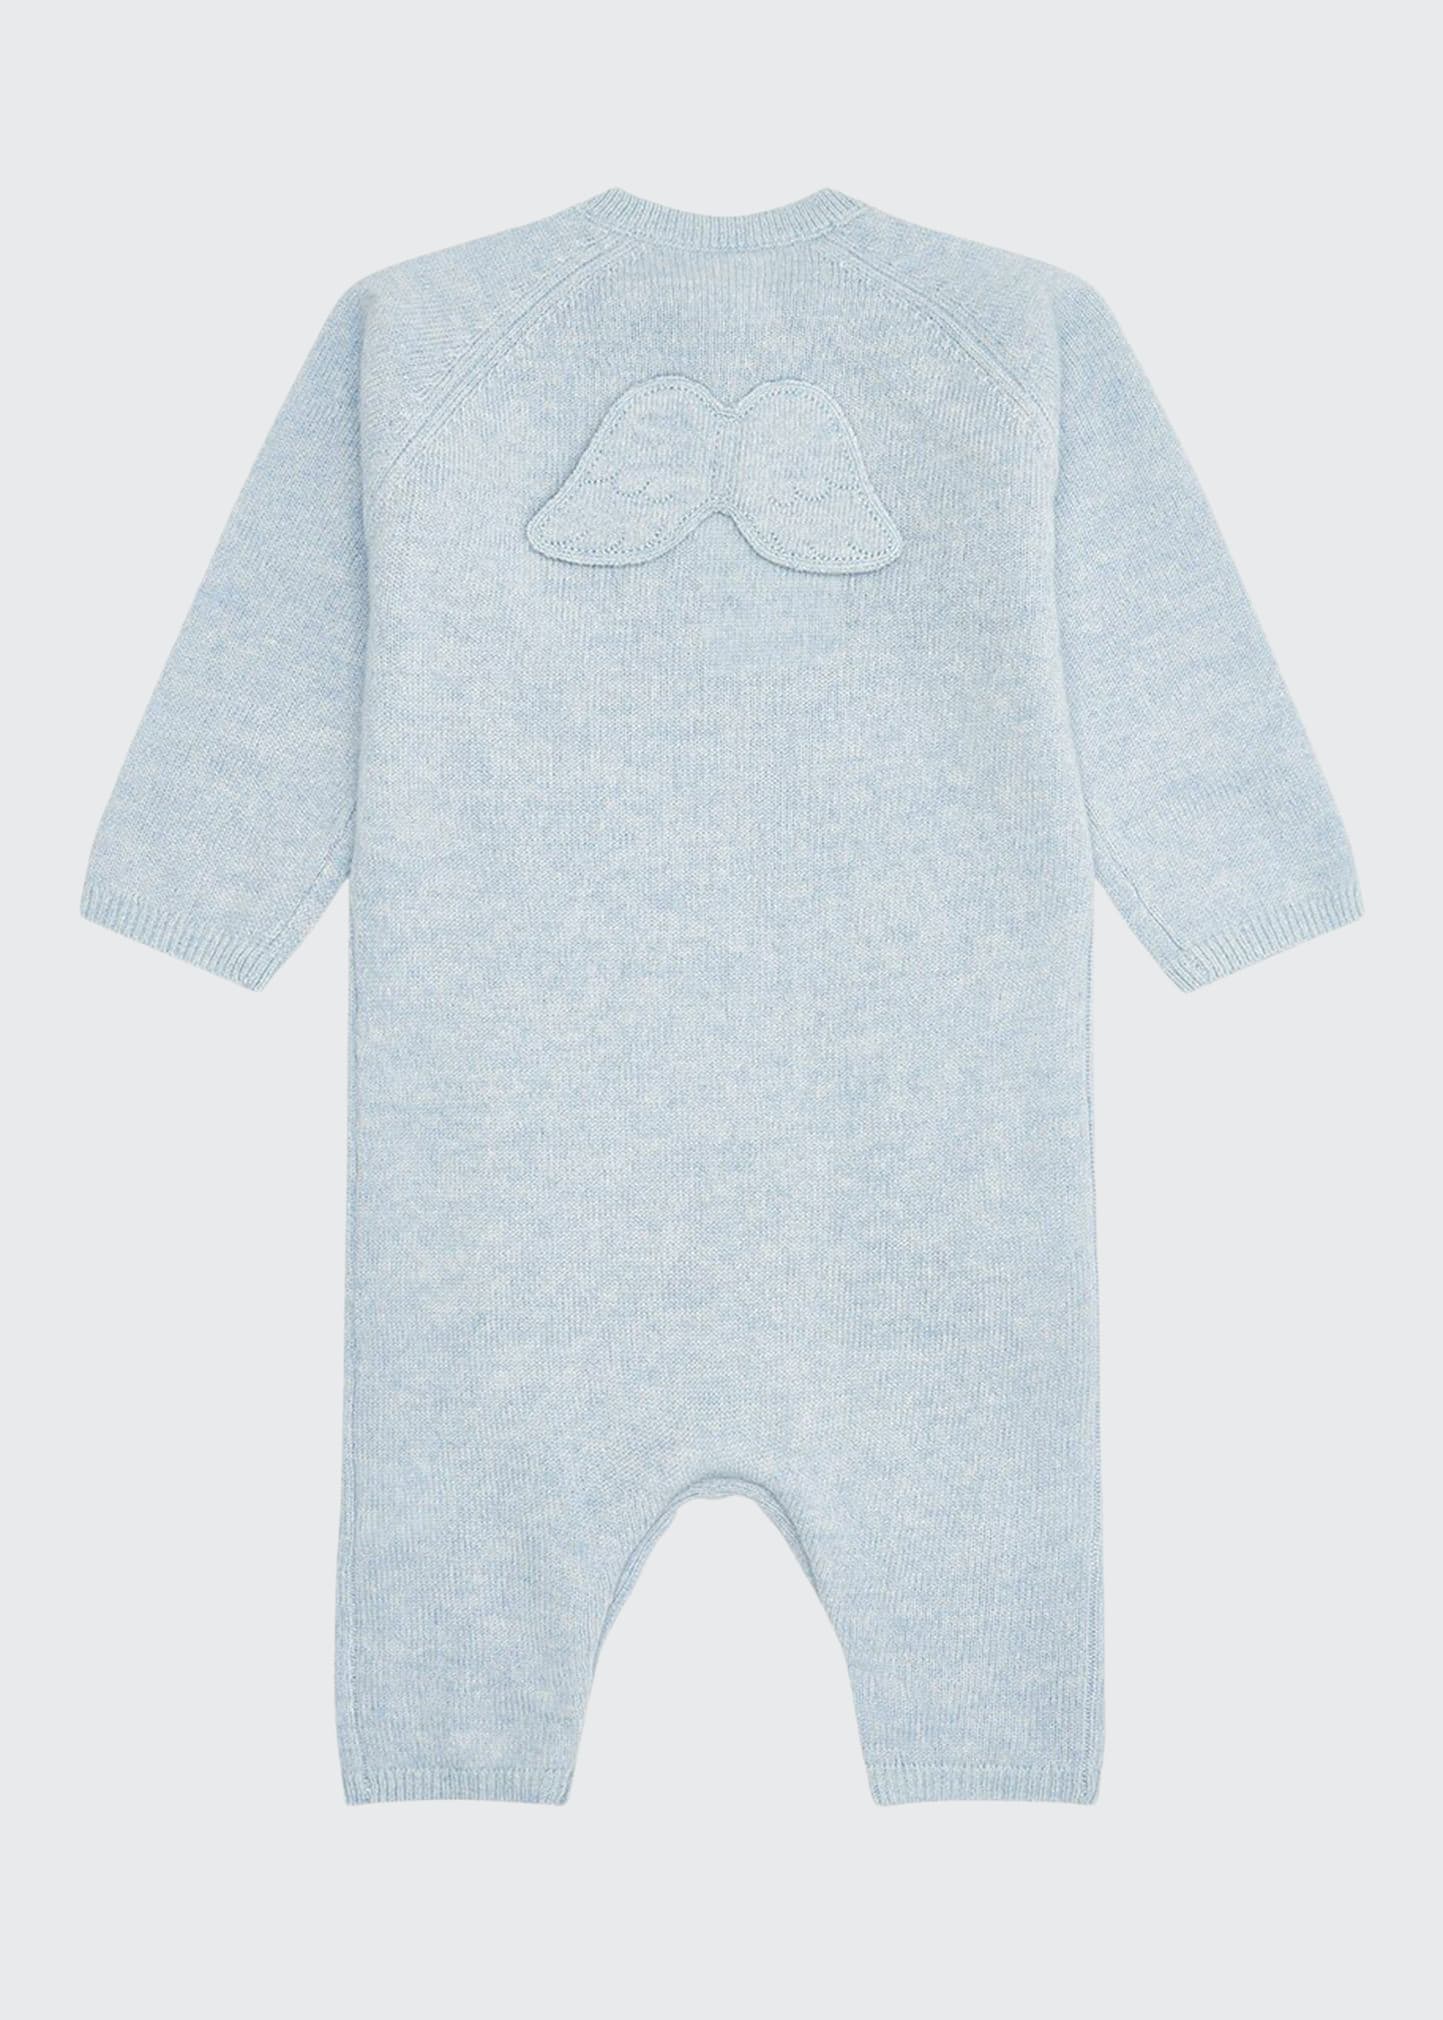 Marie Chantal Ariel Cashmere Angelwing Romper In Blue